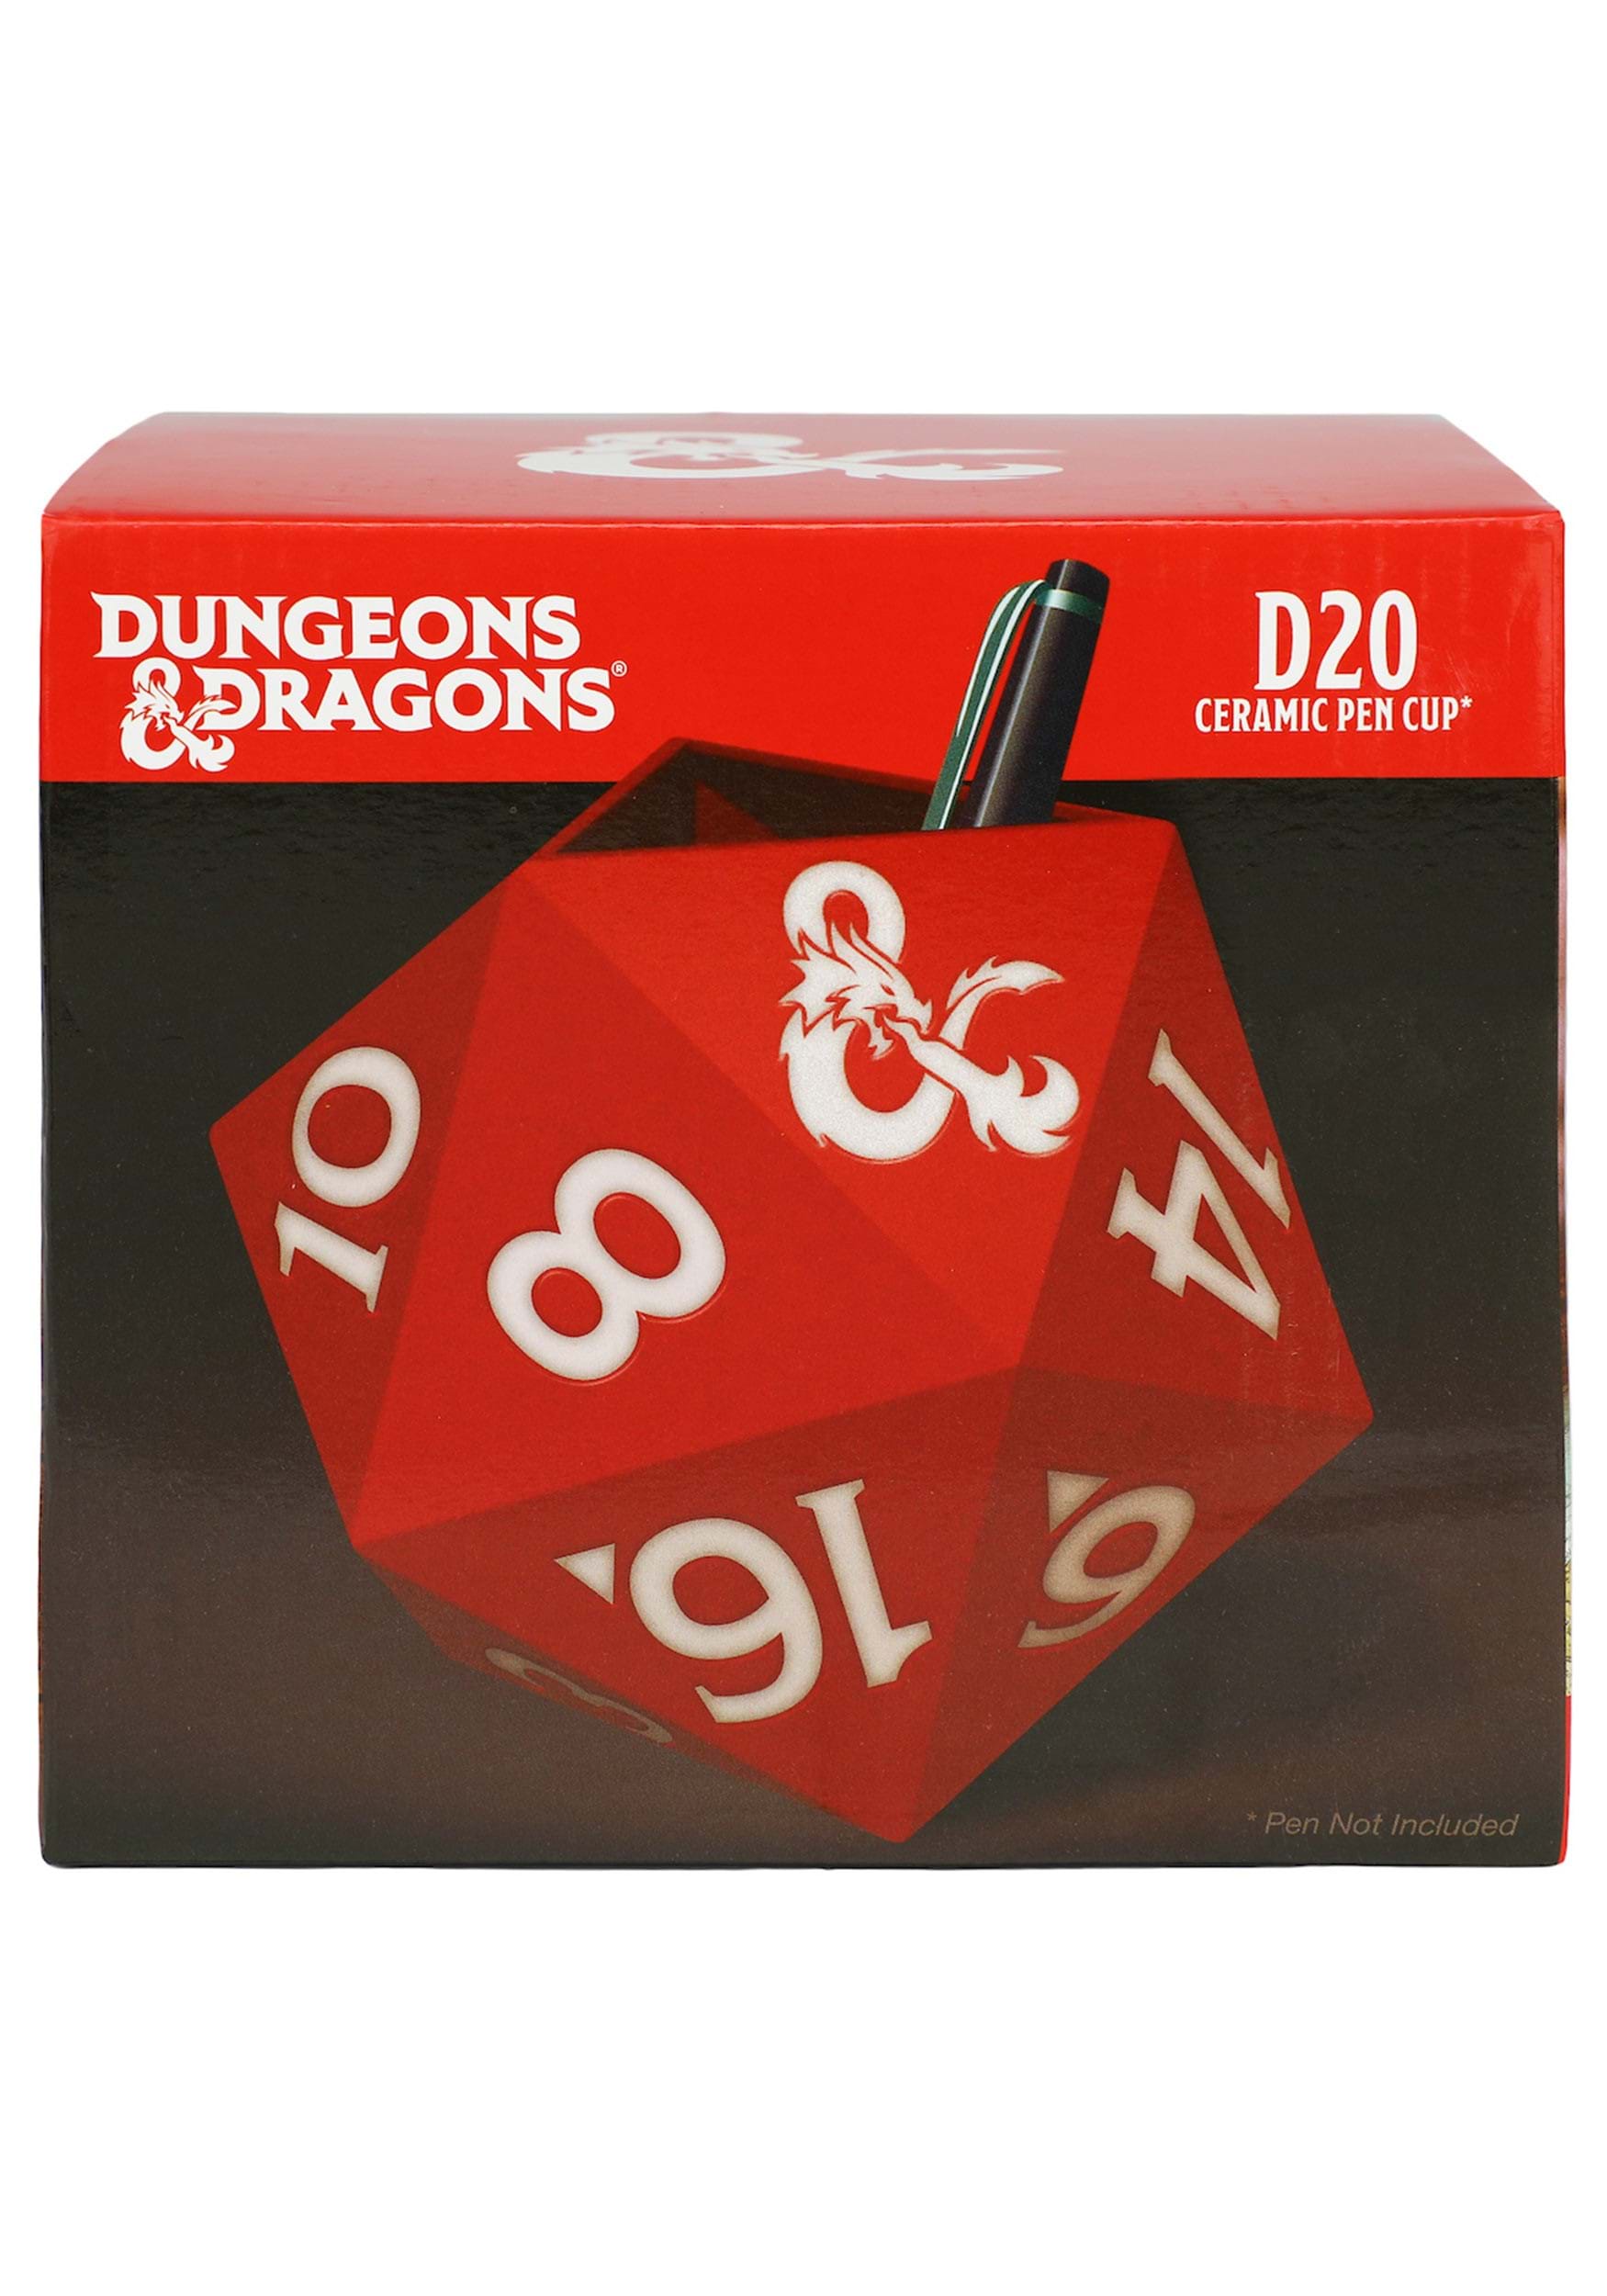 Dungeons e Dices